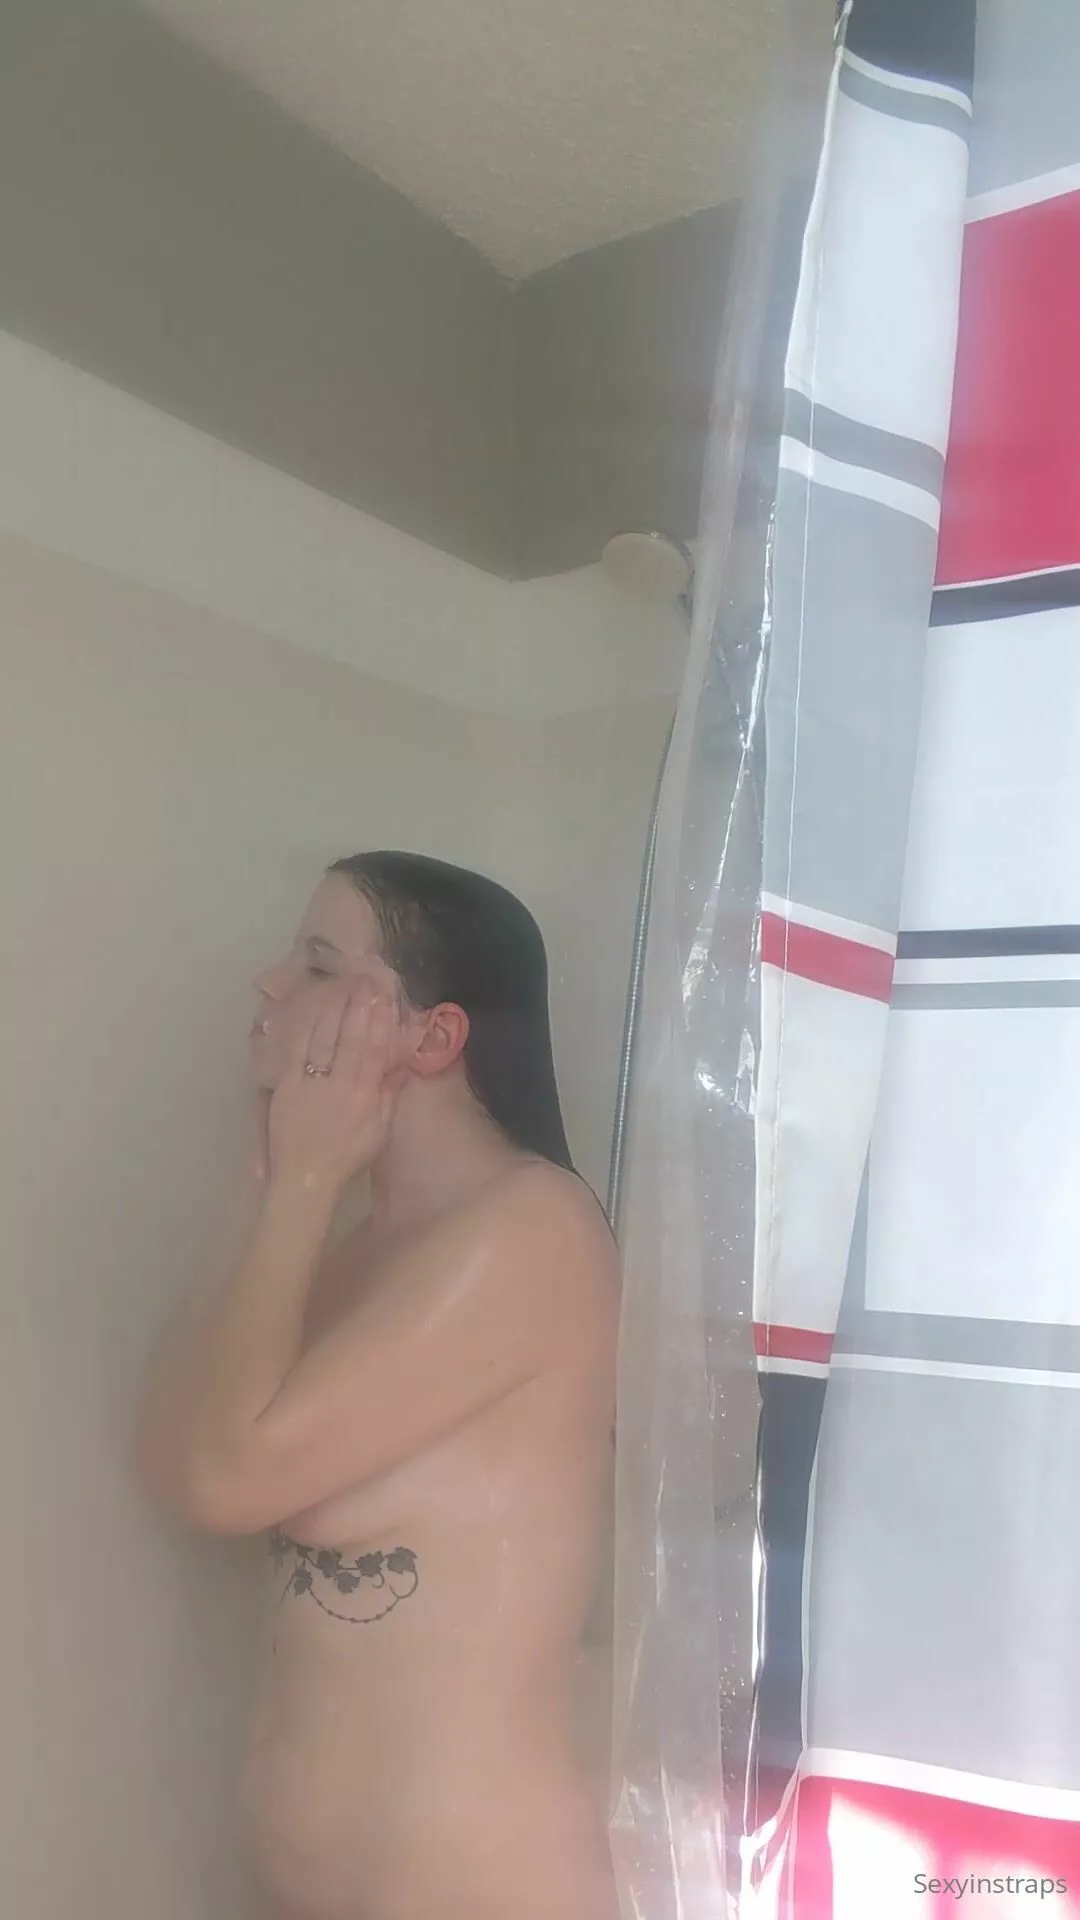 Sexyinstraps come watch me shower peeping tom voyeur style xxx onlyfans porn videos picture